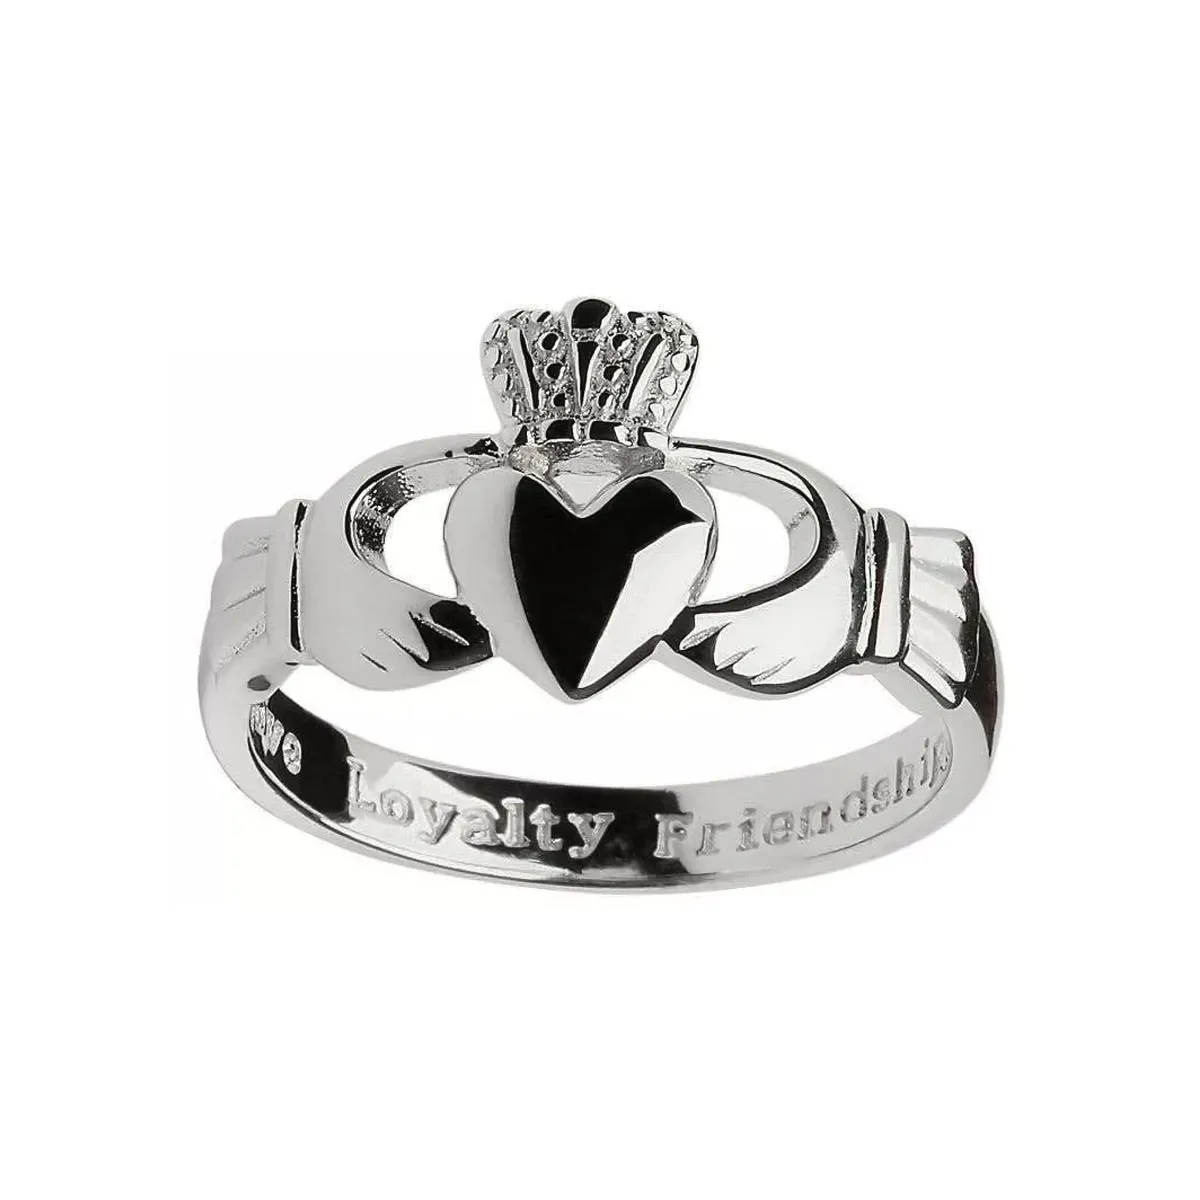 Buy JO WISDOM Infinity Heart Promise Rings for Her Sterling Silver  Friendship Ring at Amazon.in